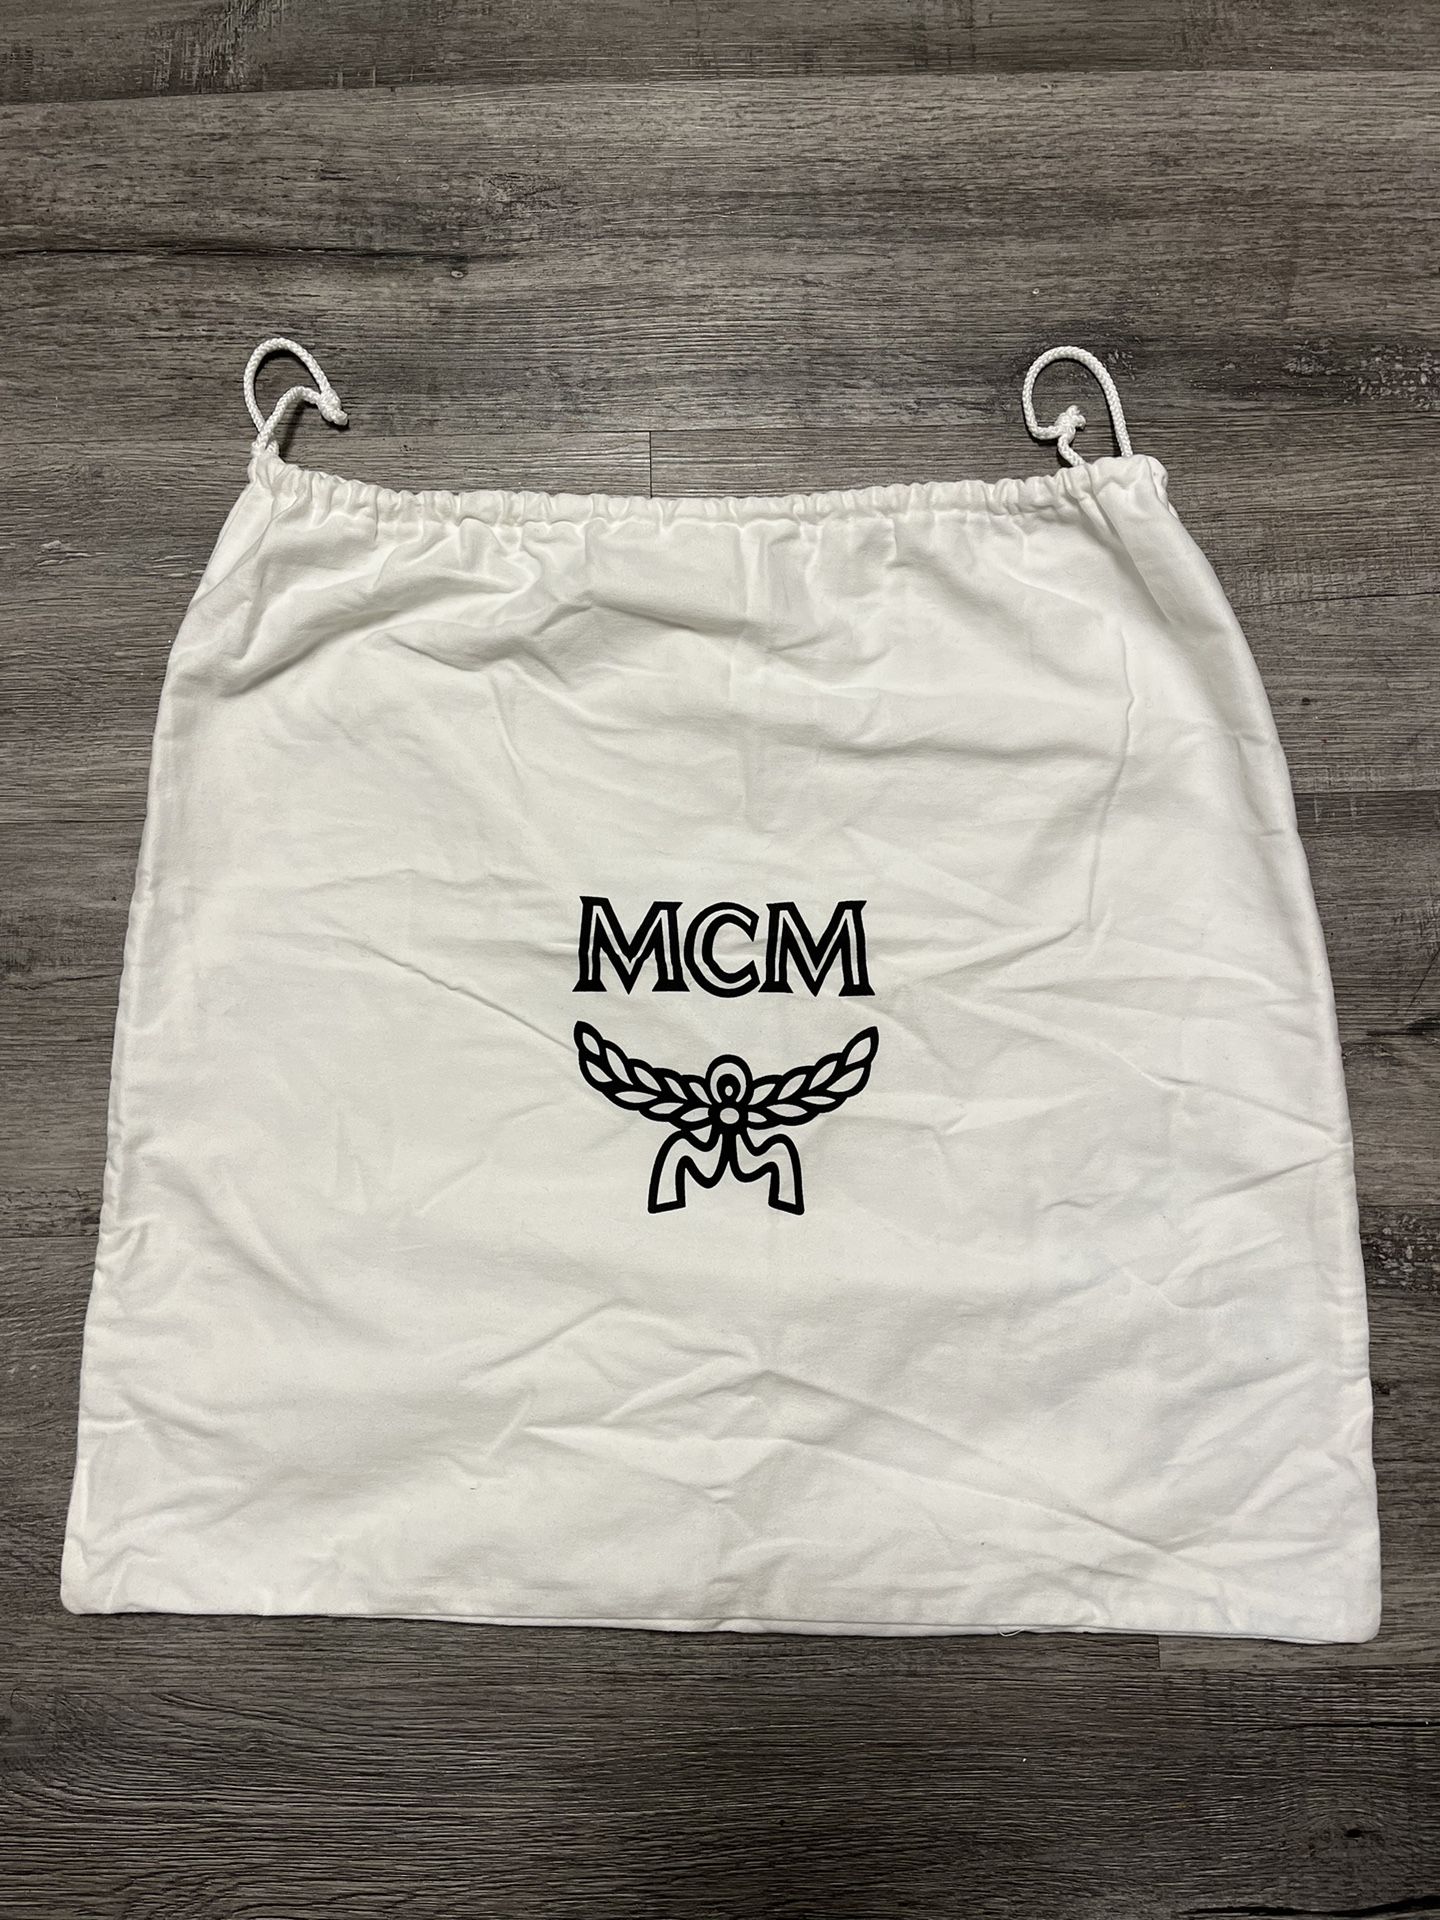 NWOT MCM Dust Bag White with Drawstrings Large, Would Fit Large Bag, 19x20